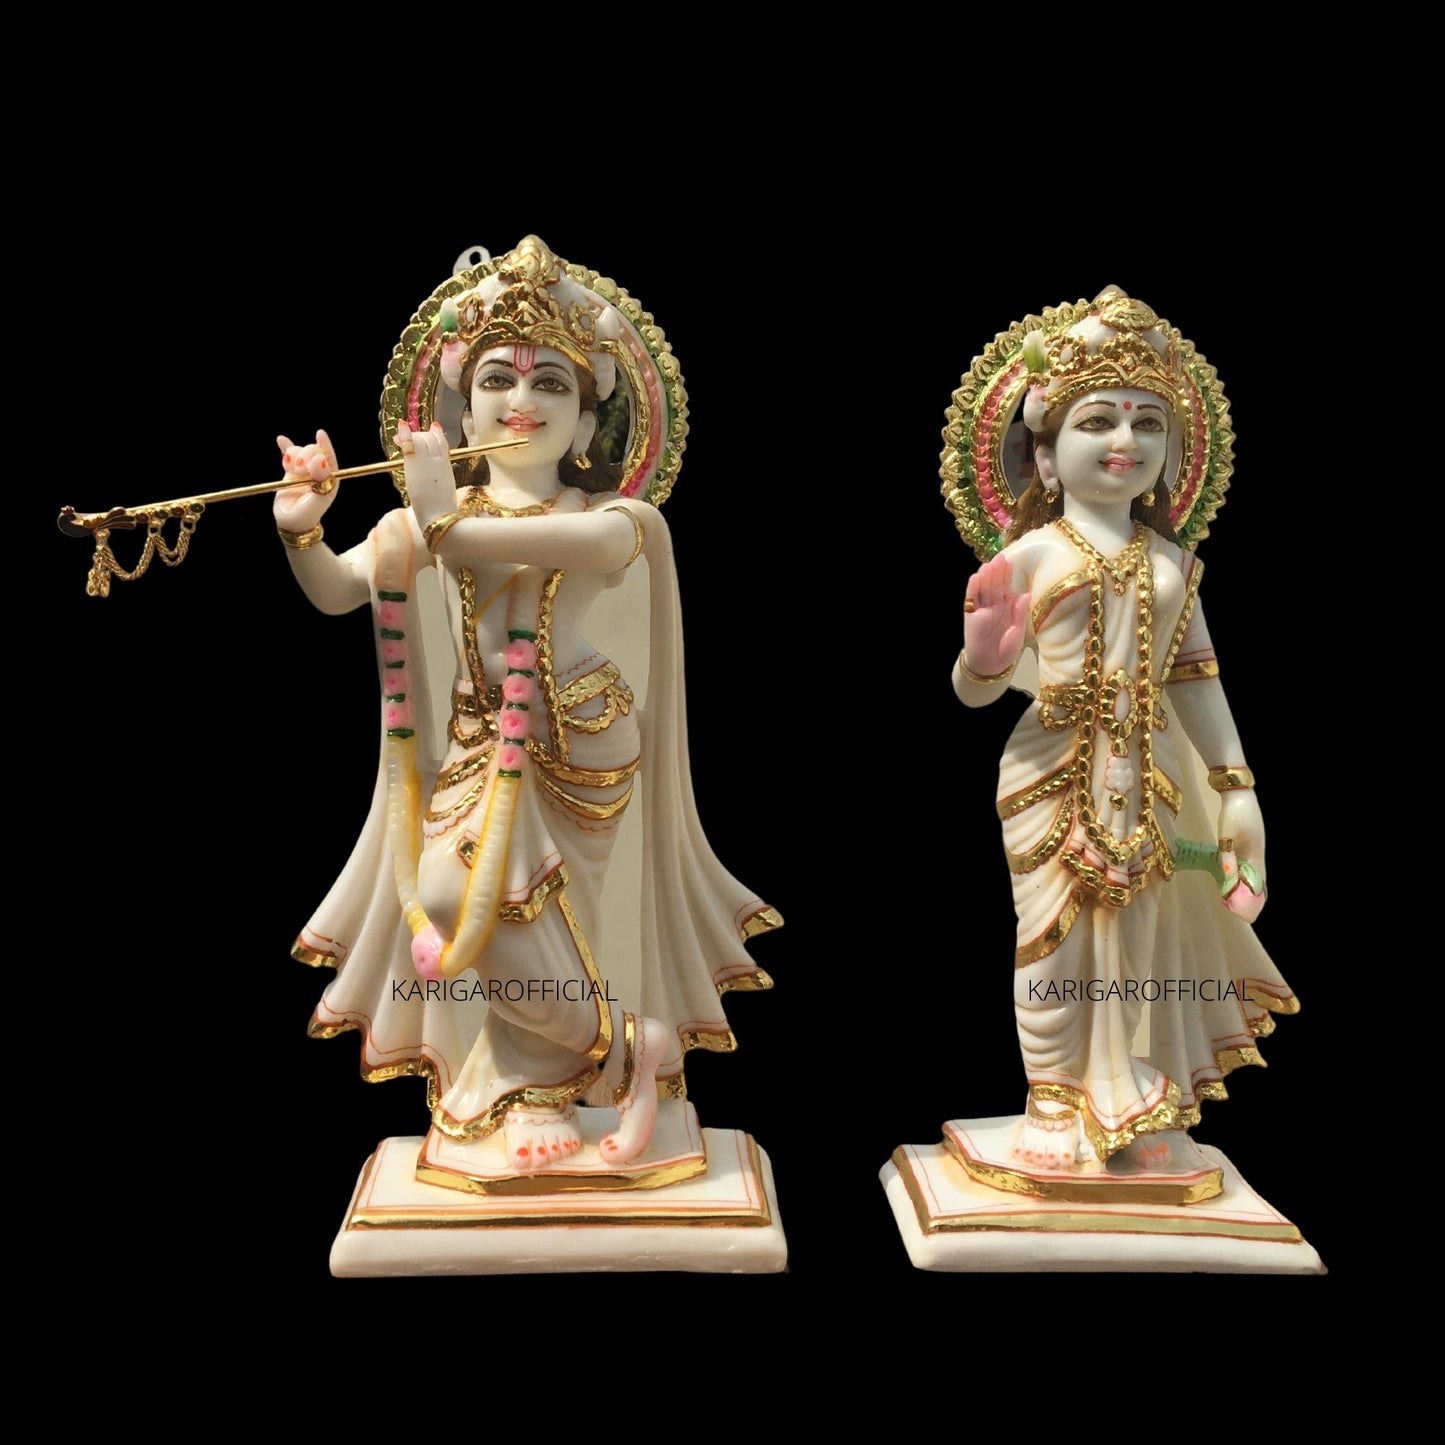 Radha Krishna Statue, Hindu Divine Couple Handpainted Murti, Large 12 inches White Marble Gold Leaf Work Religious idol, Home Temple Decoration Wedding Housewarming Anniversary Gifts Sculpture